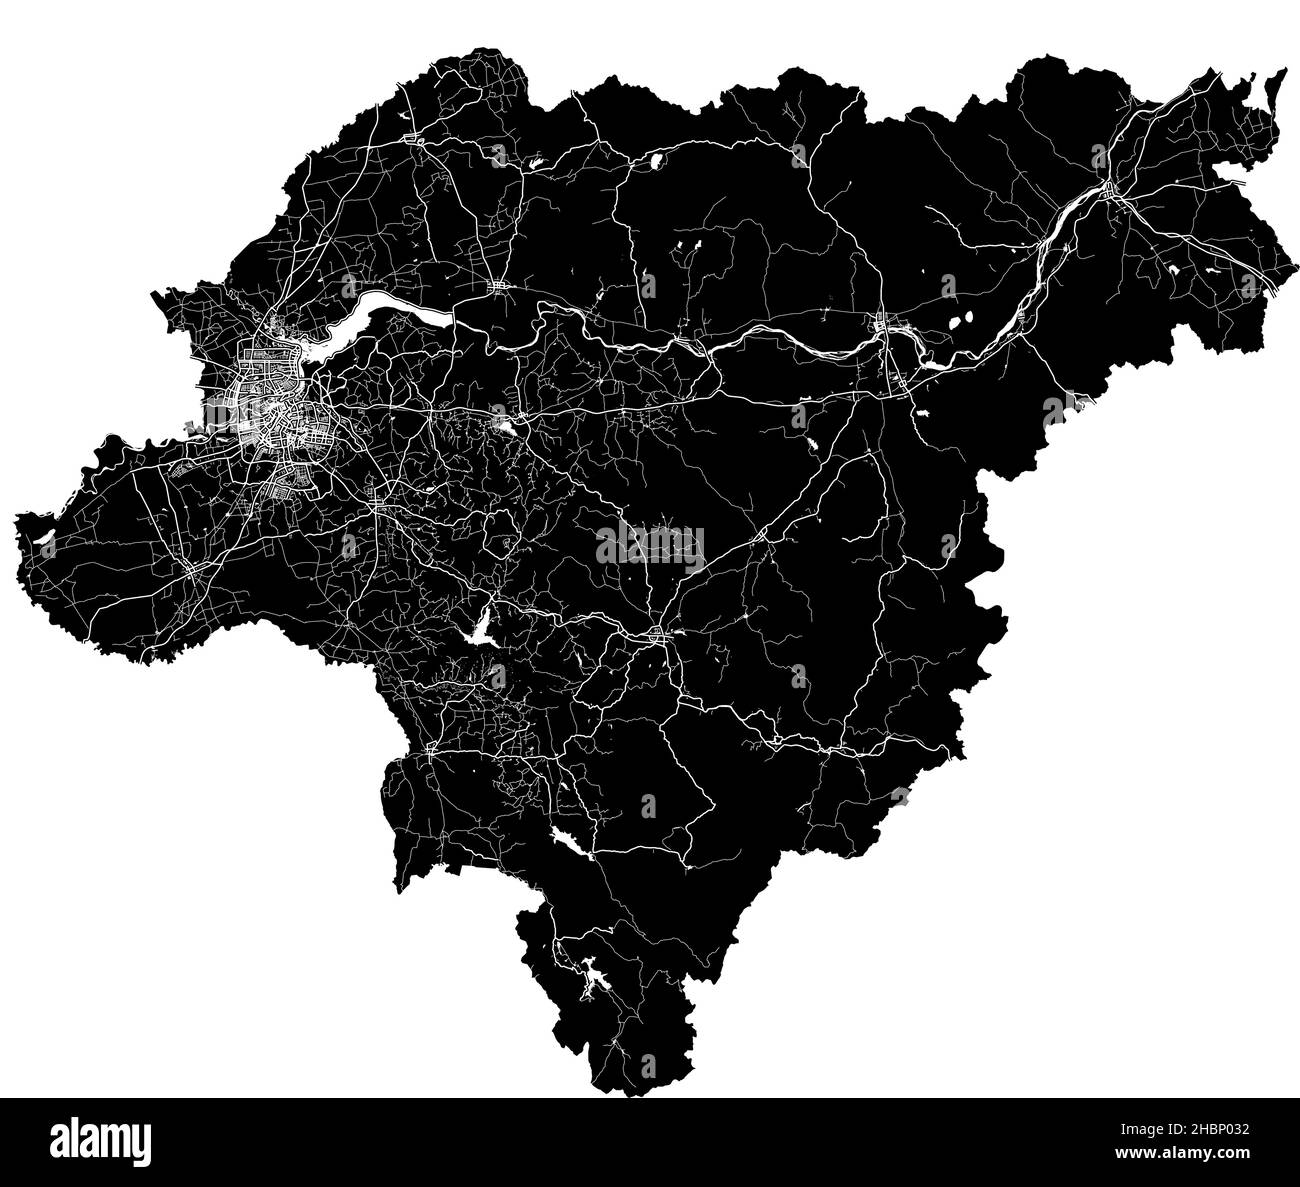 Harbin, China, high resolution vector map with city boundaries, and editable paths. The city map was drawn with white areas and lines for main roads, Stock Vector